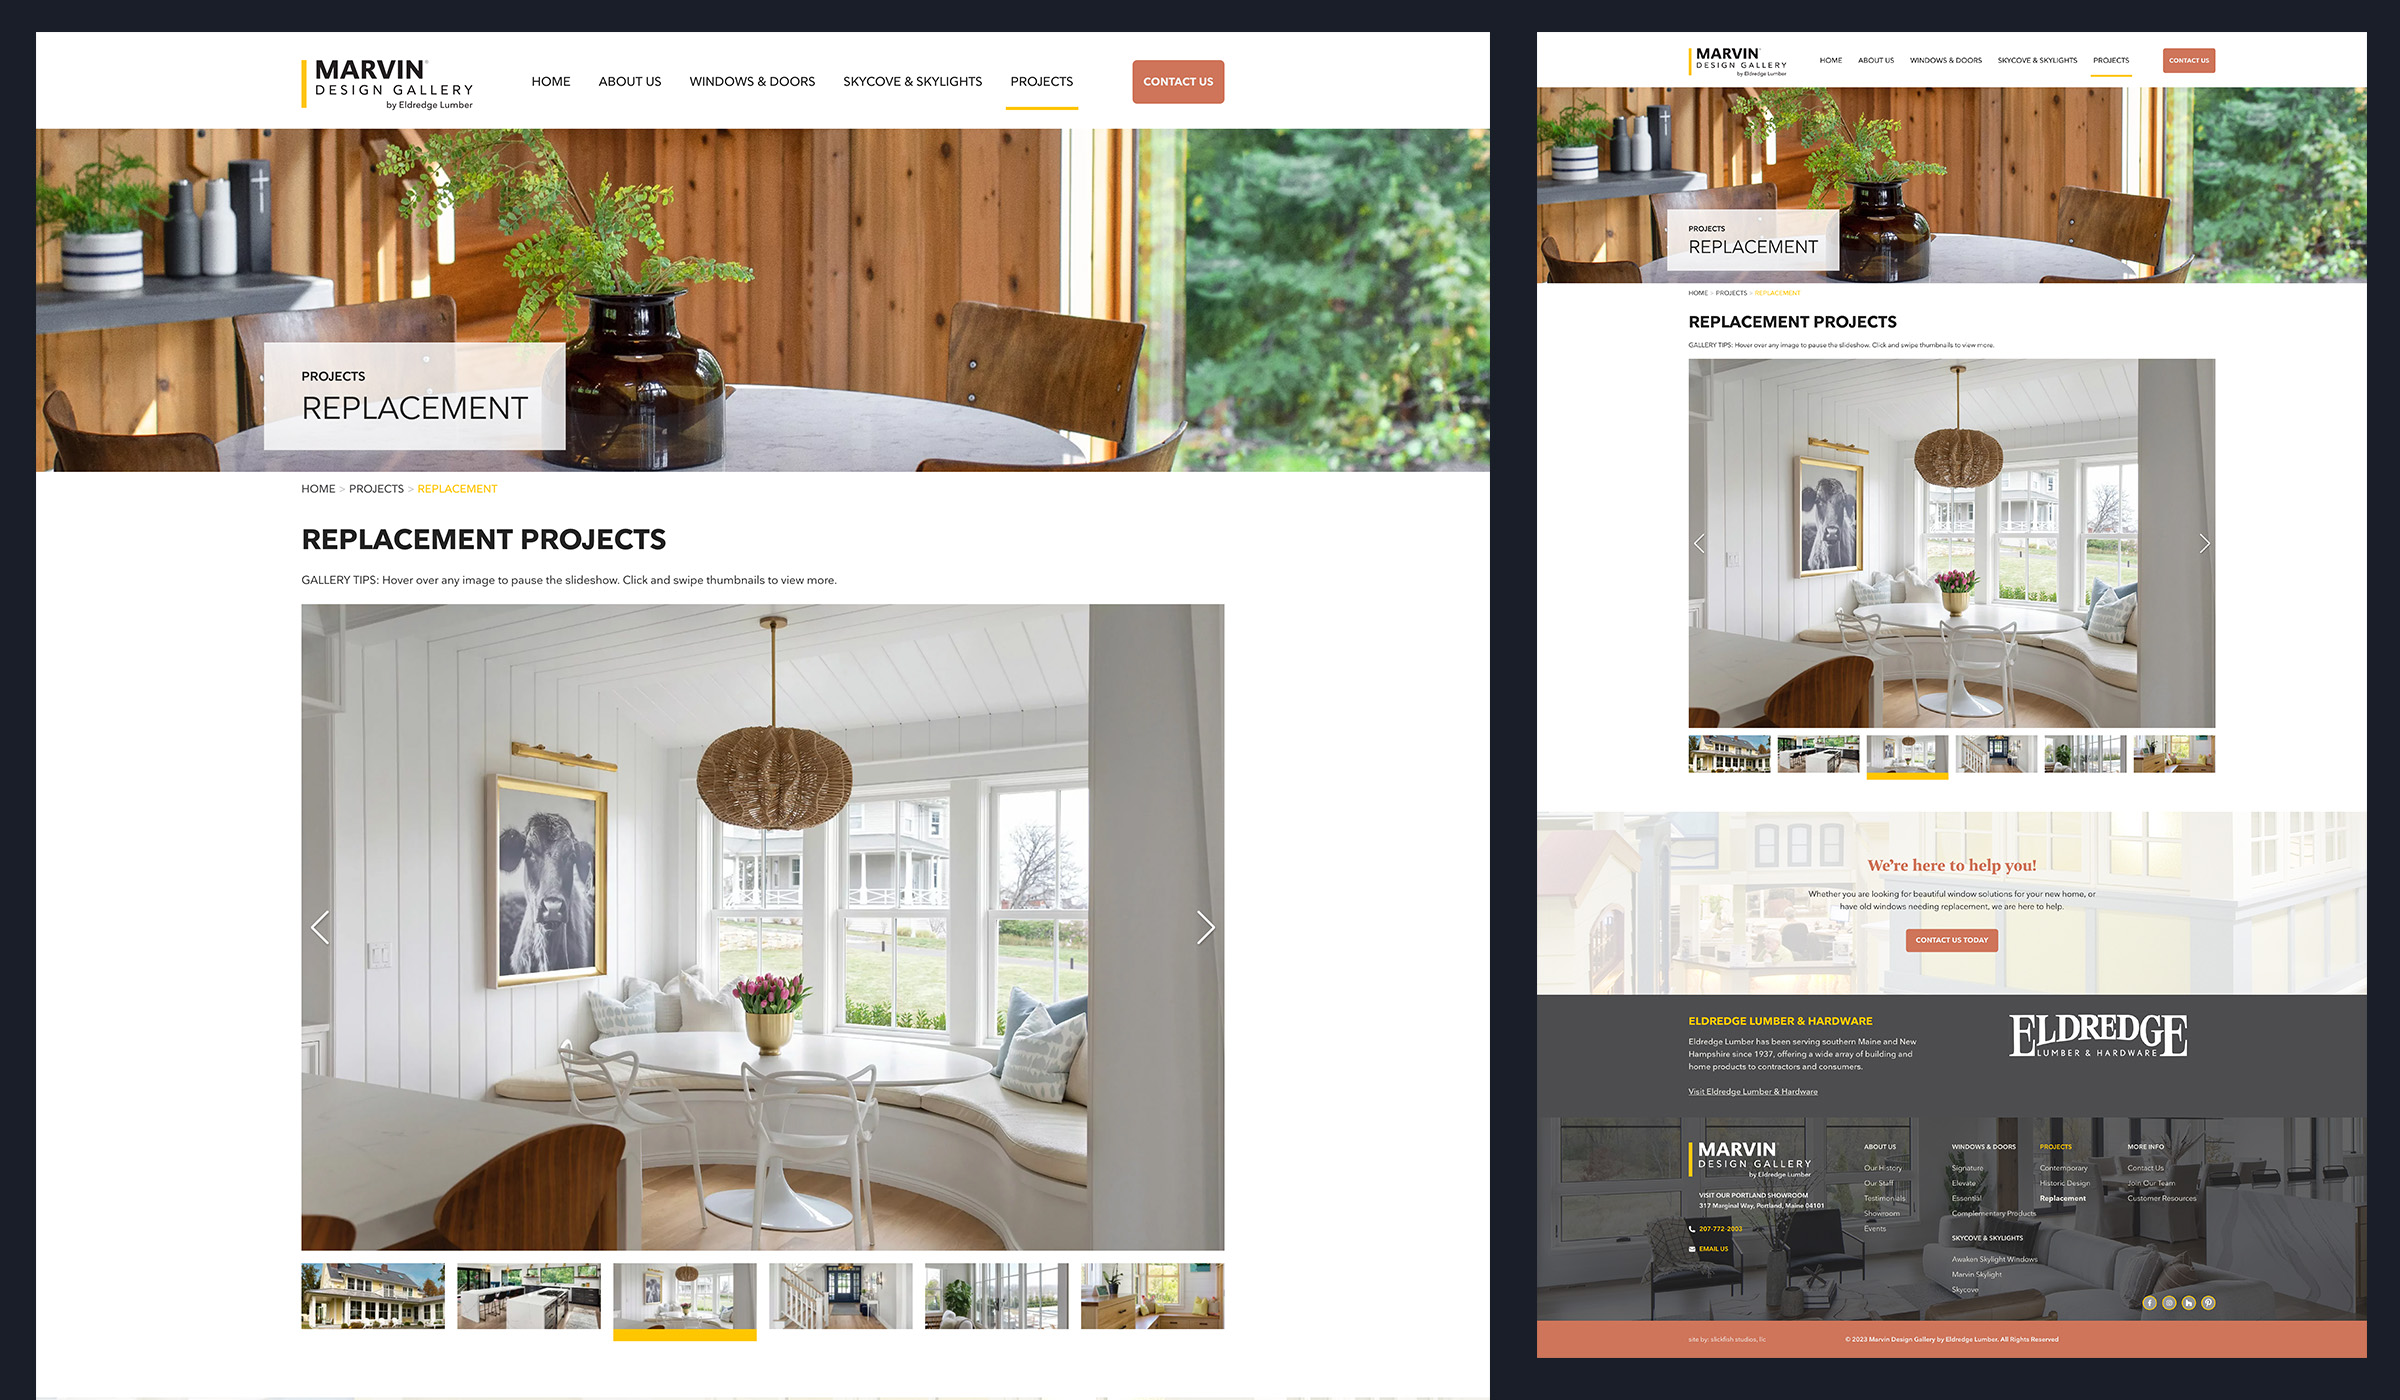 Marvin Design Gallery Replacement window projects: A Maine Website Design by SlickFish Studios